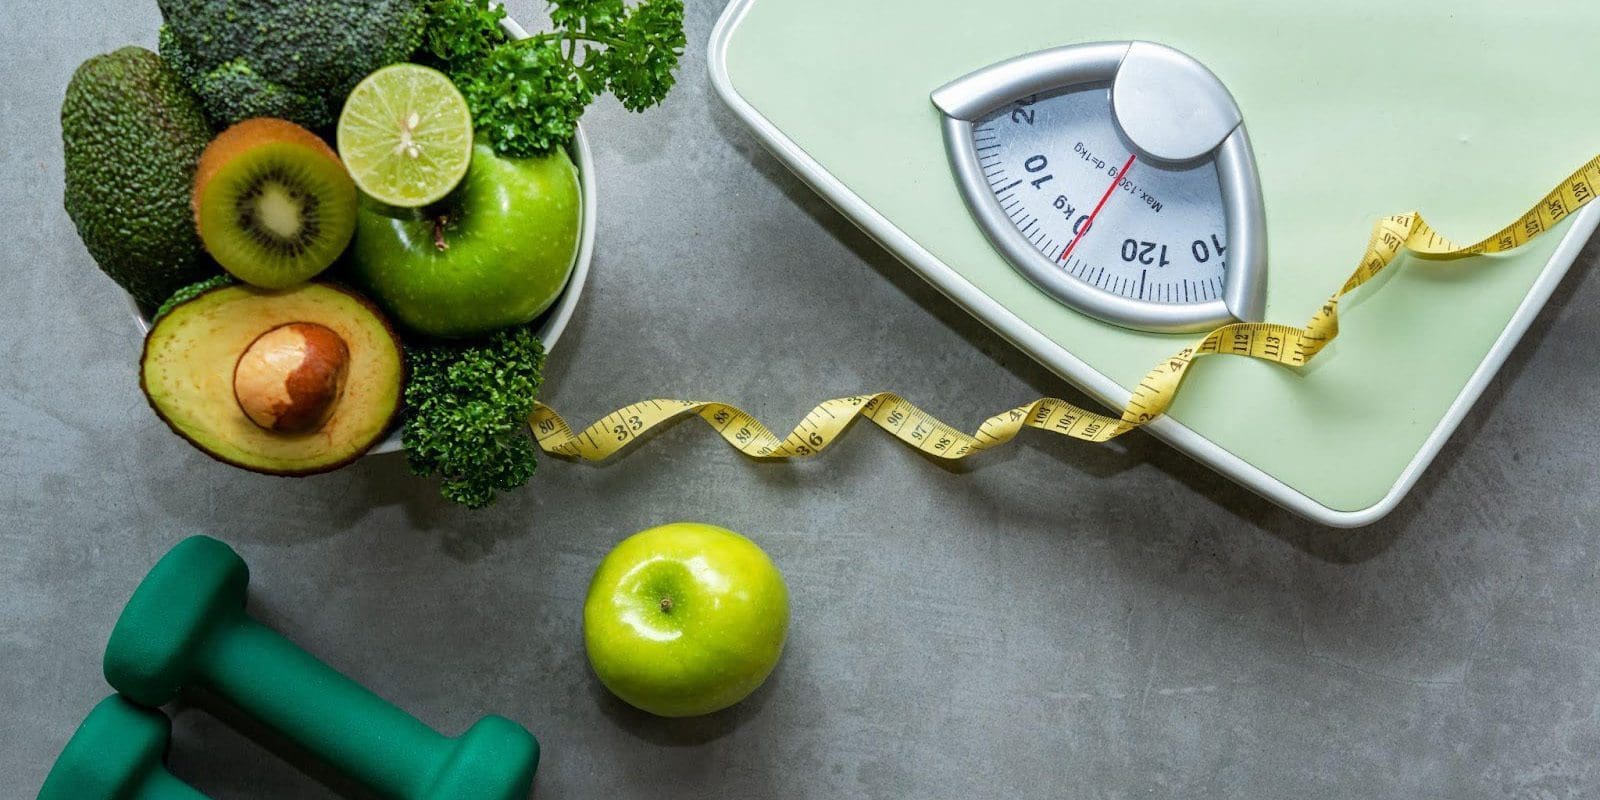 A scale, measuring tape, bowl of fruit and vegetables and hand weights.